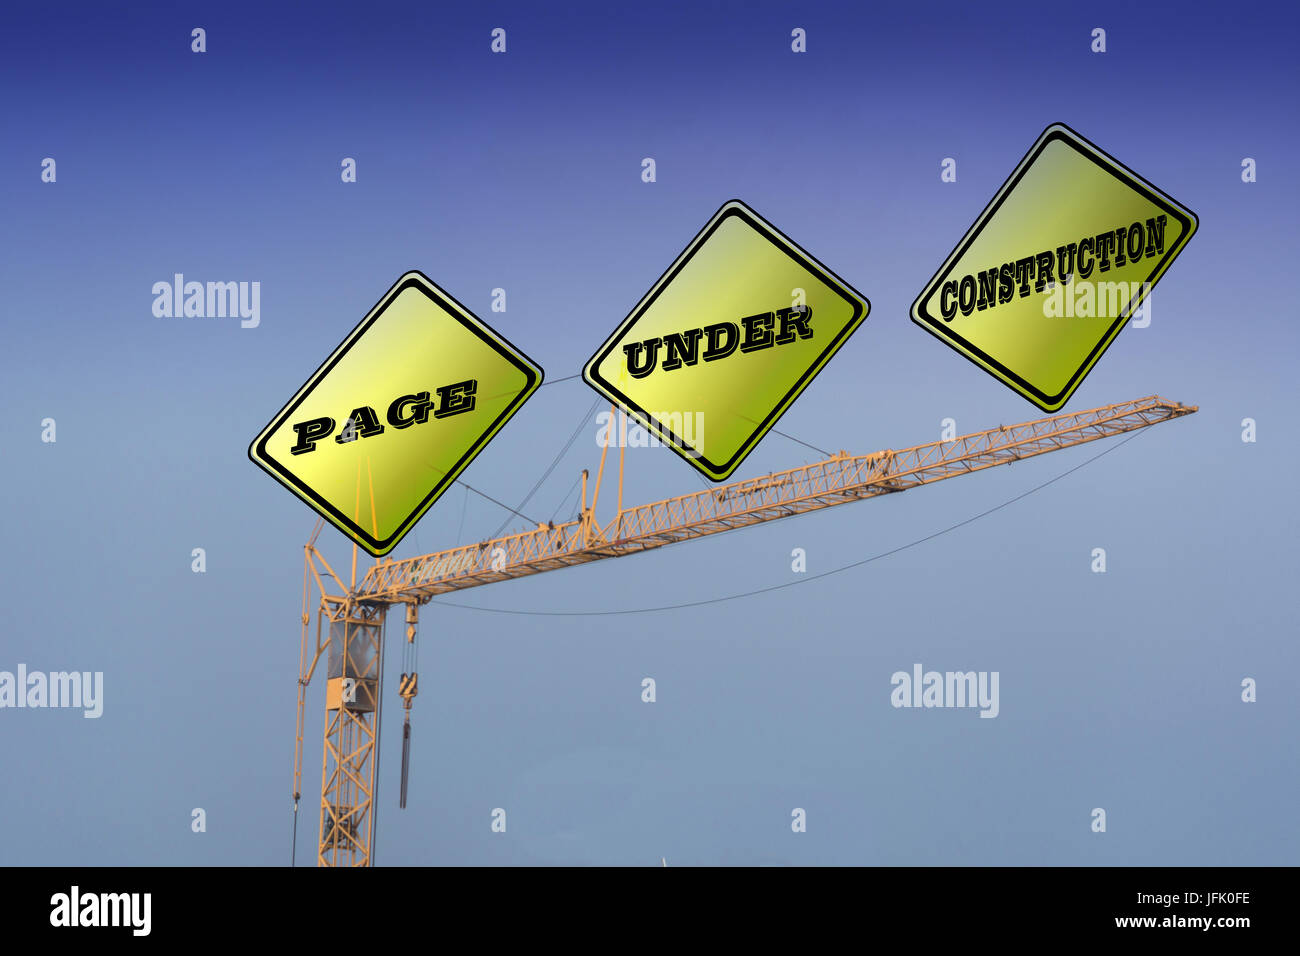 Construction Crane that says Page Under Construction Stock Photo